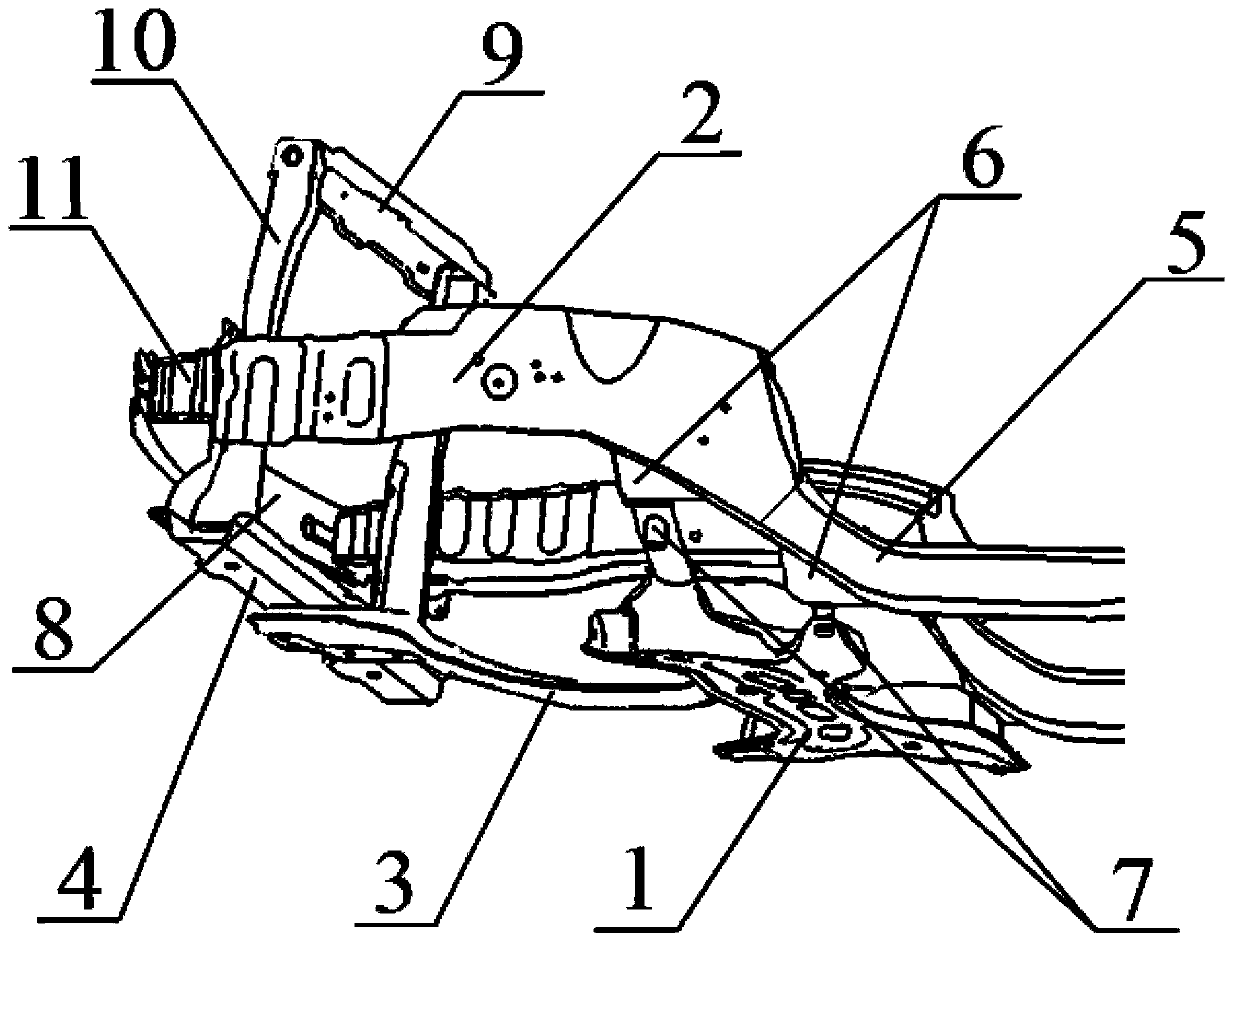 Automobile front auxiliary frame installing structure